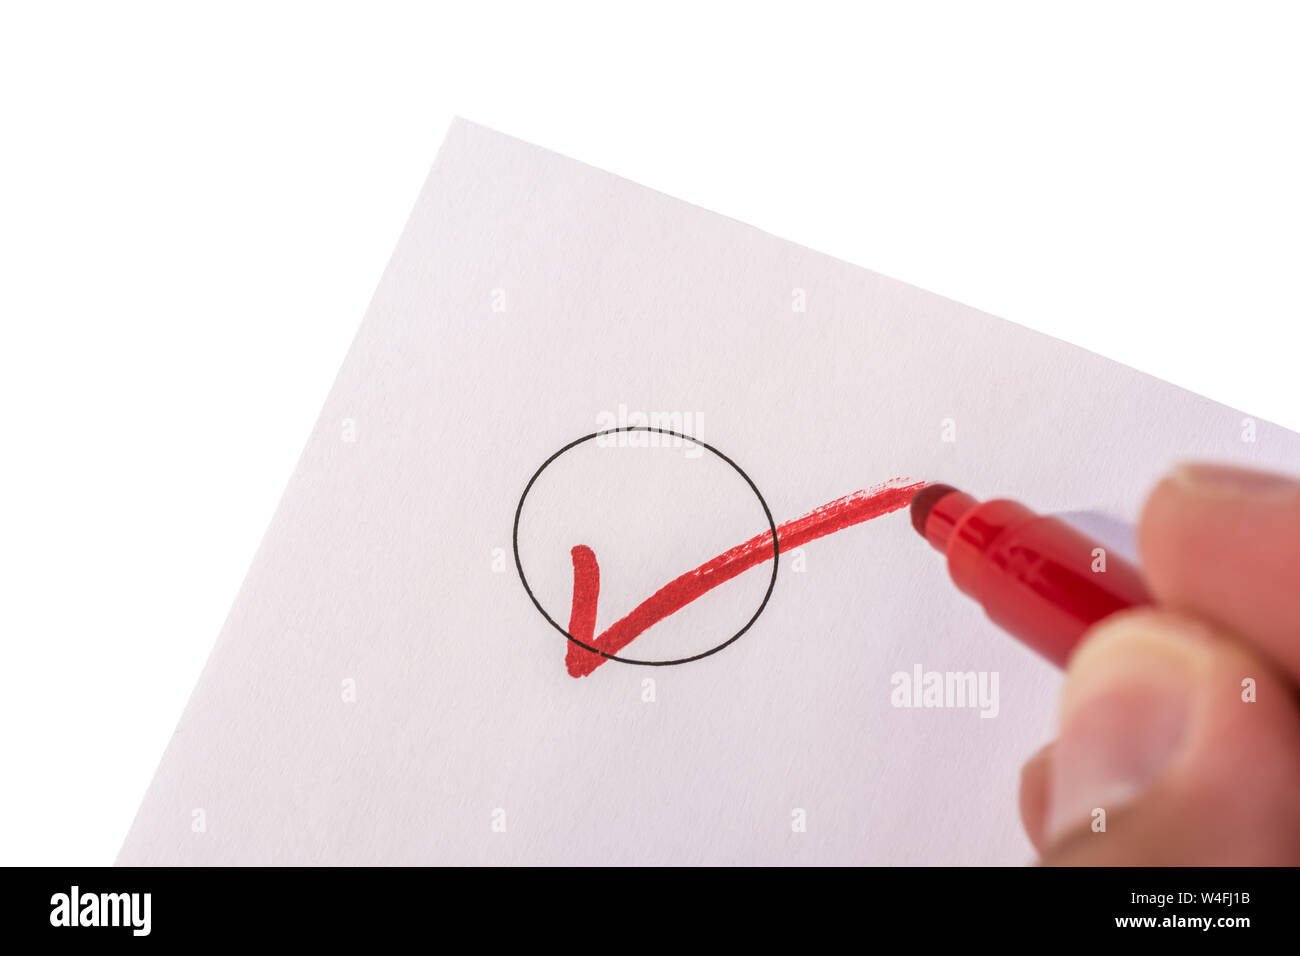 Checking a circle on an isolated piece of paper Stock Photo